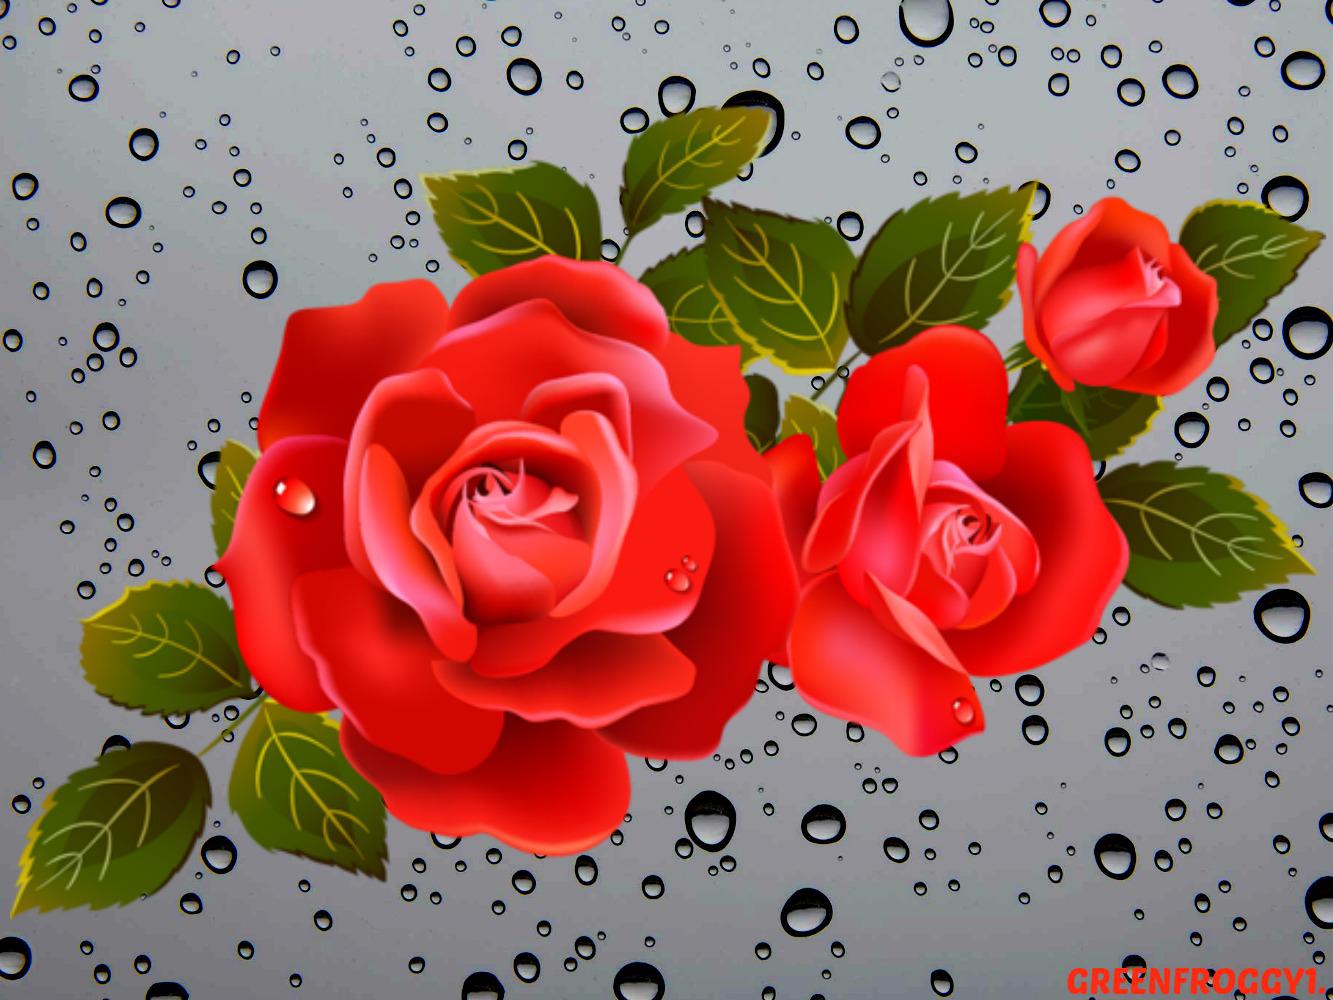 Rose with water droplets - High Quality and Resolution